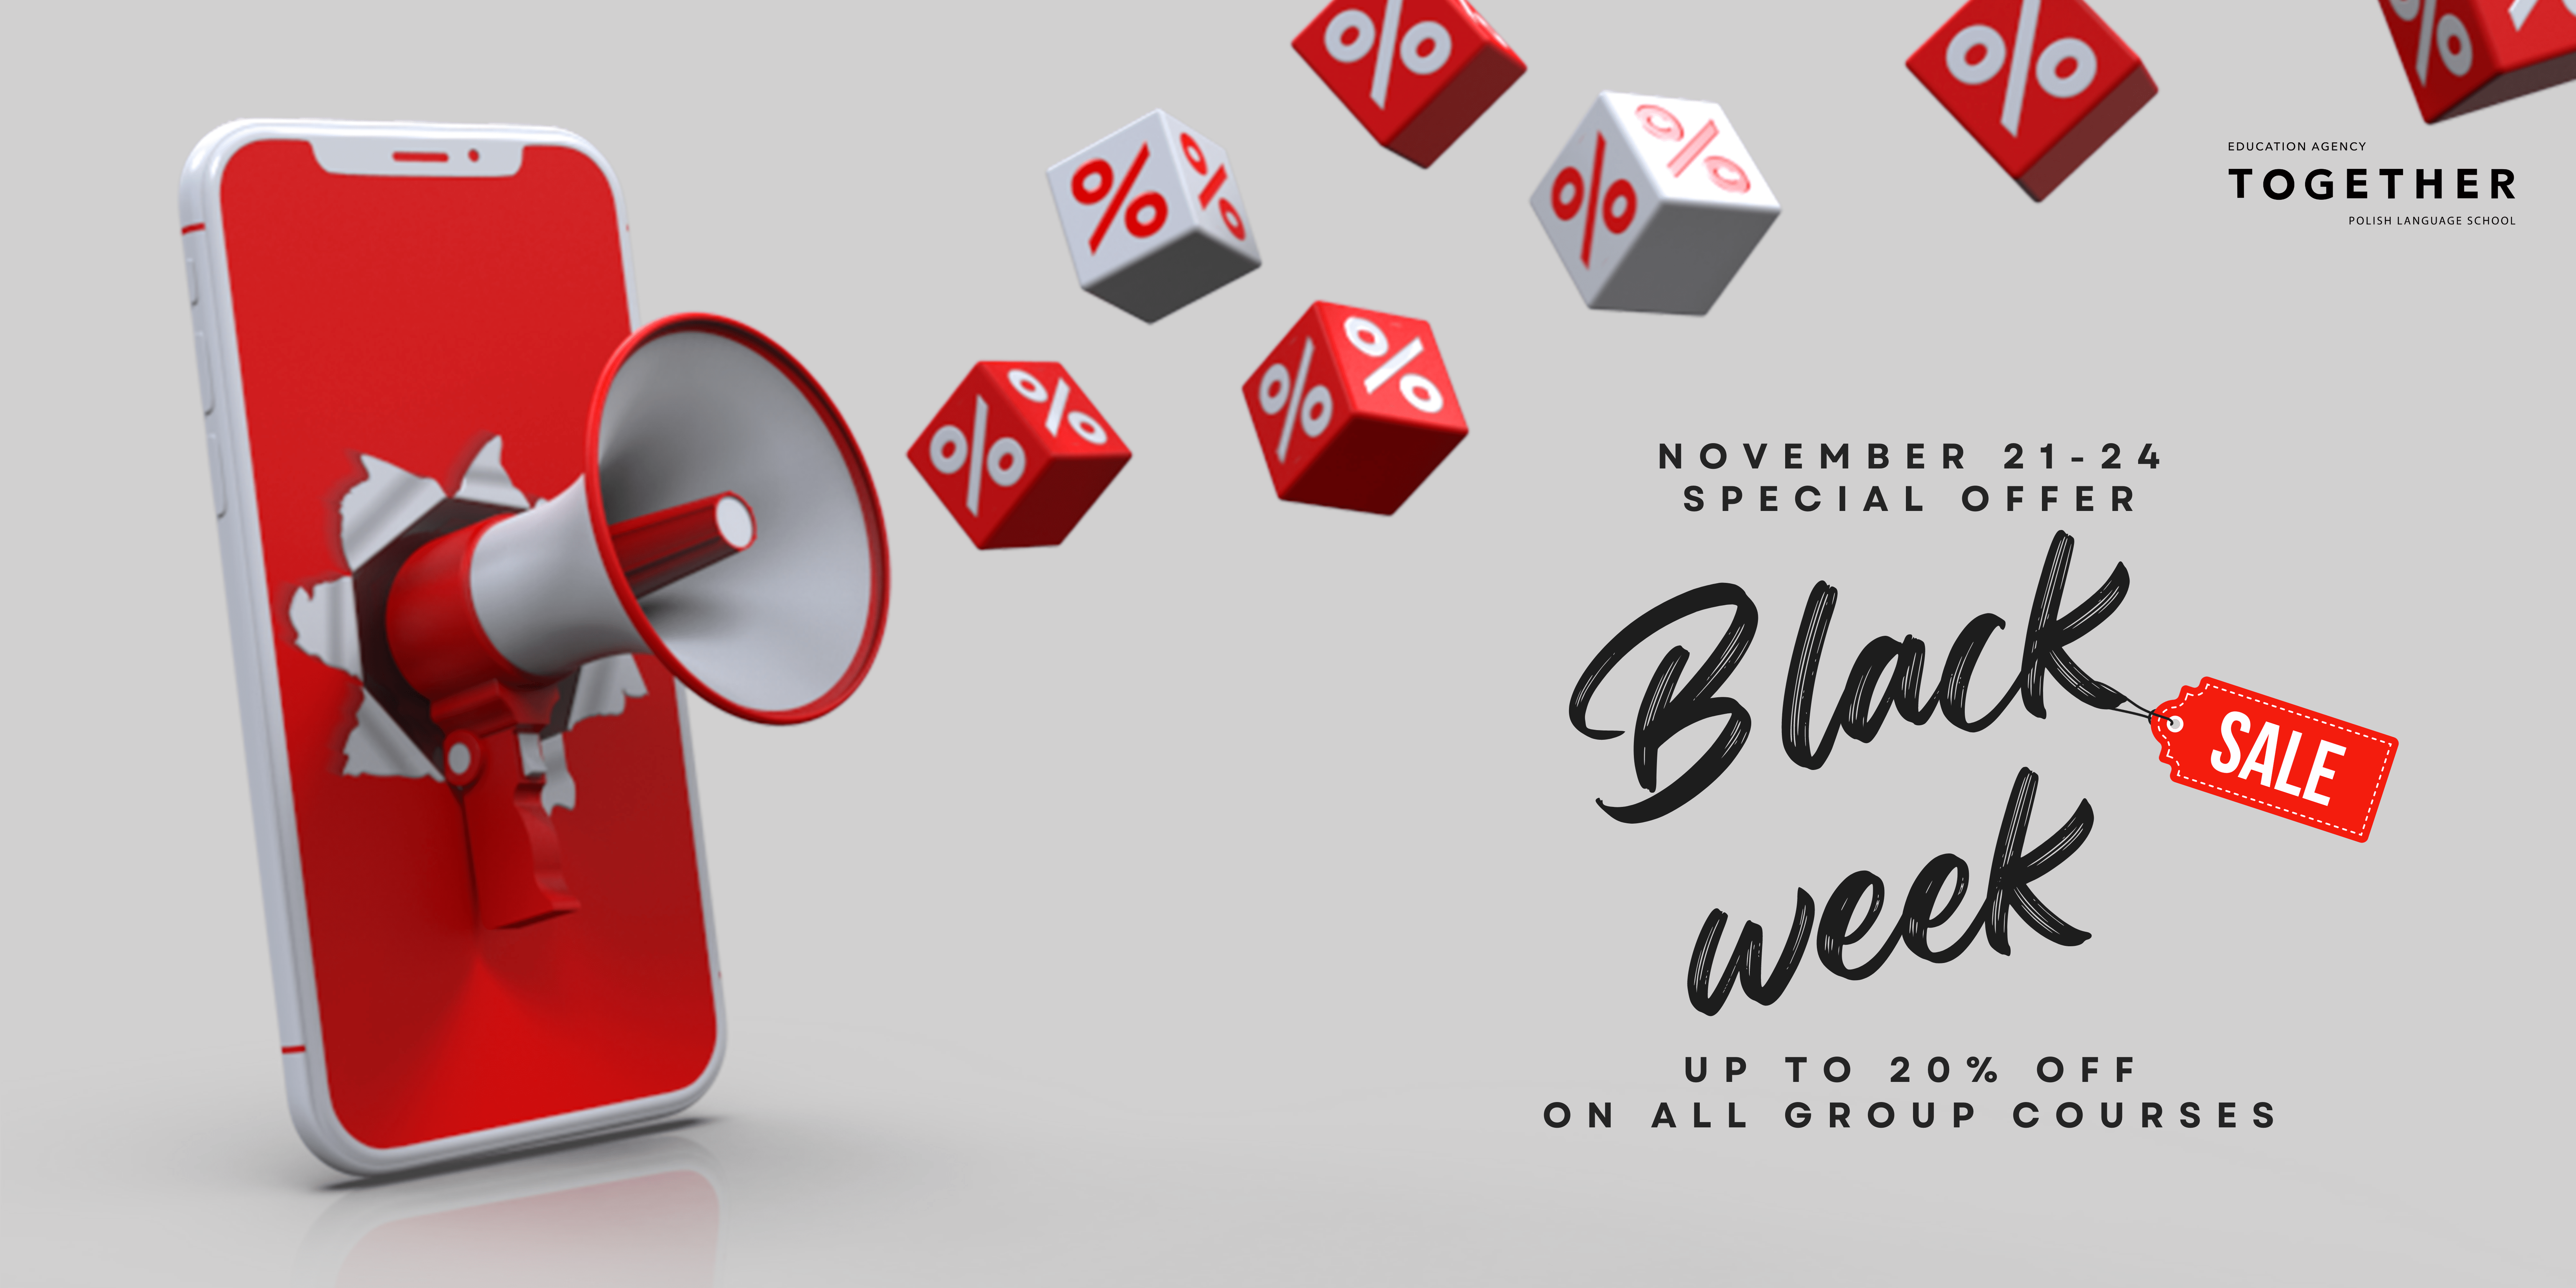 Black Week - 20 percent discount on all group Polish courses